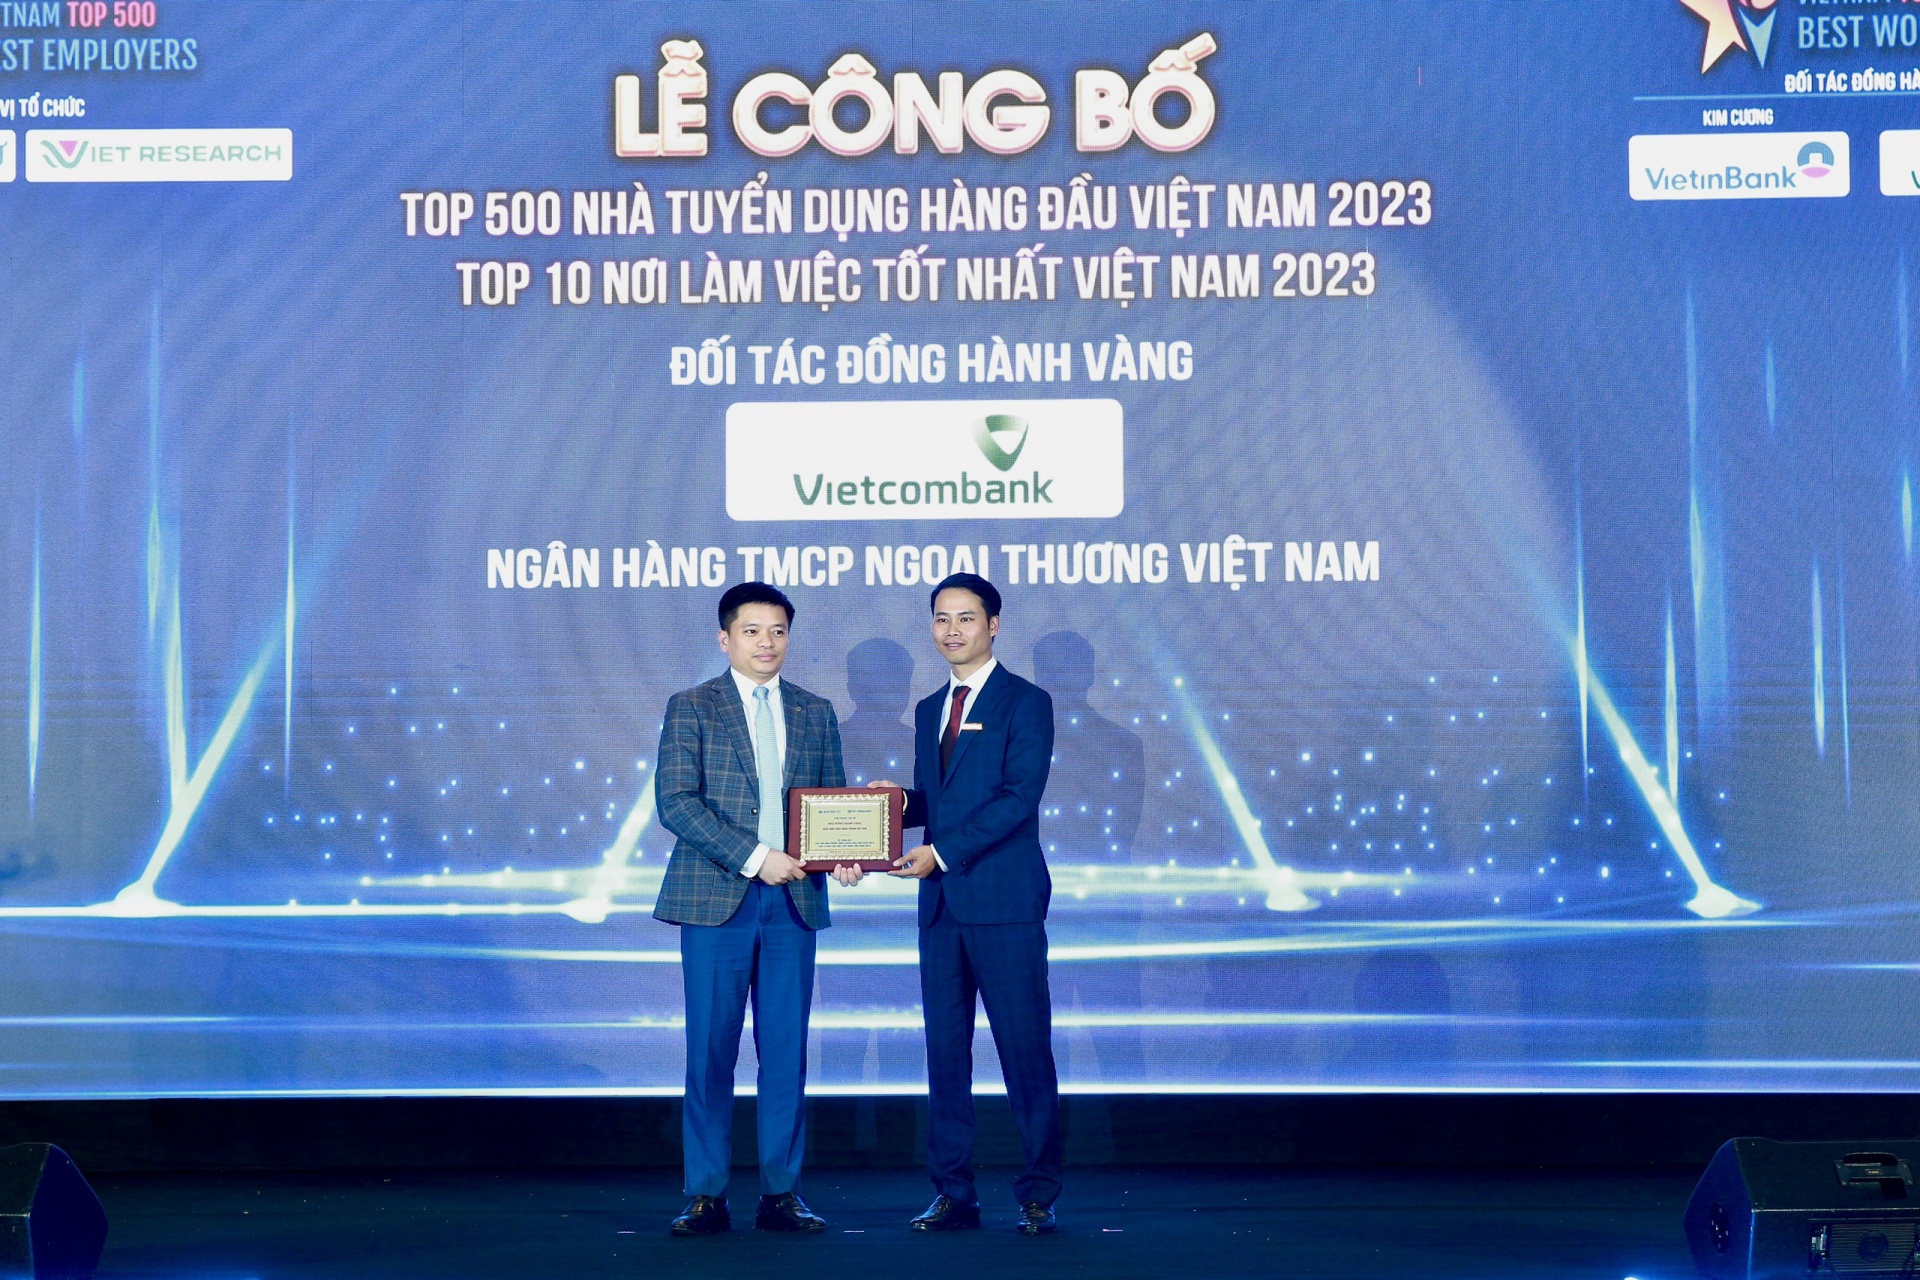 Top companies announced in VBE500 and VBW10 announced